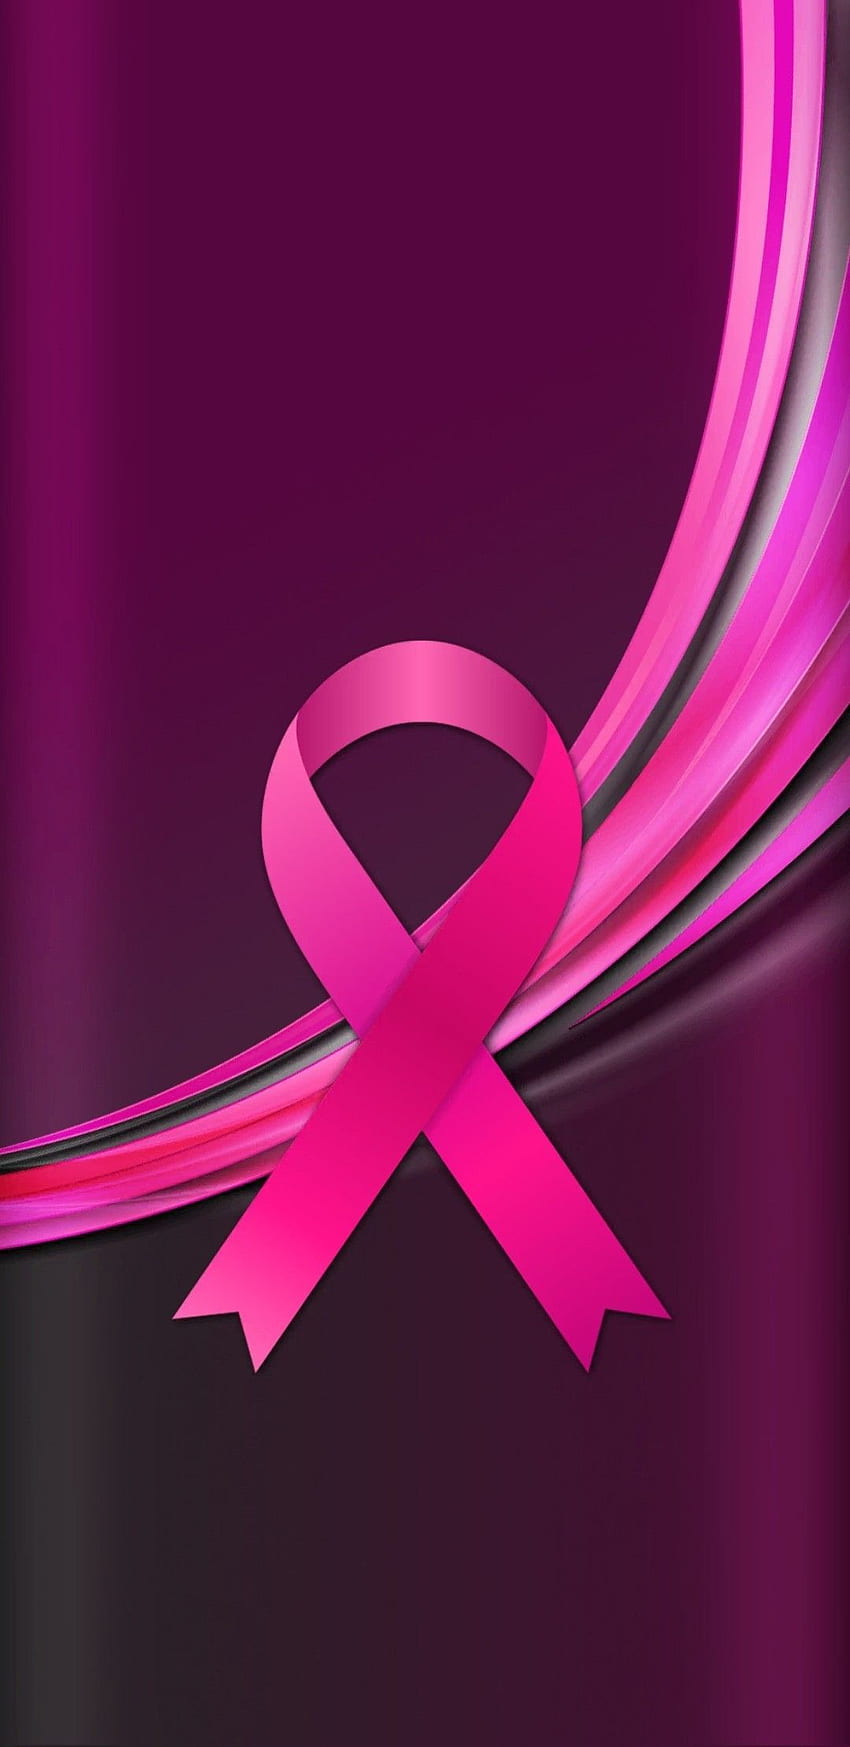 HD wallpaper pink ribbon breast cancer awareness month prevention  health  Wallpaper Flare